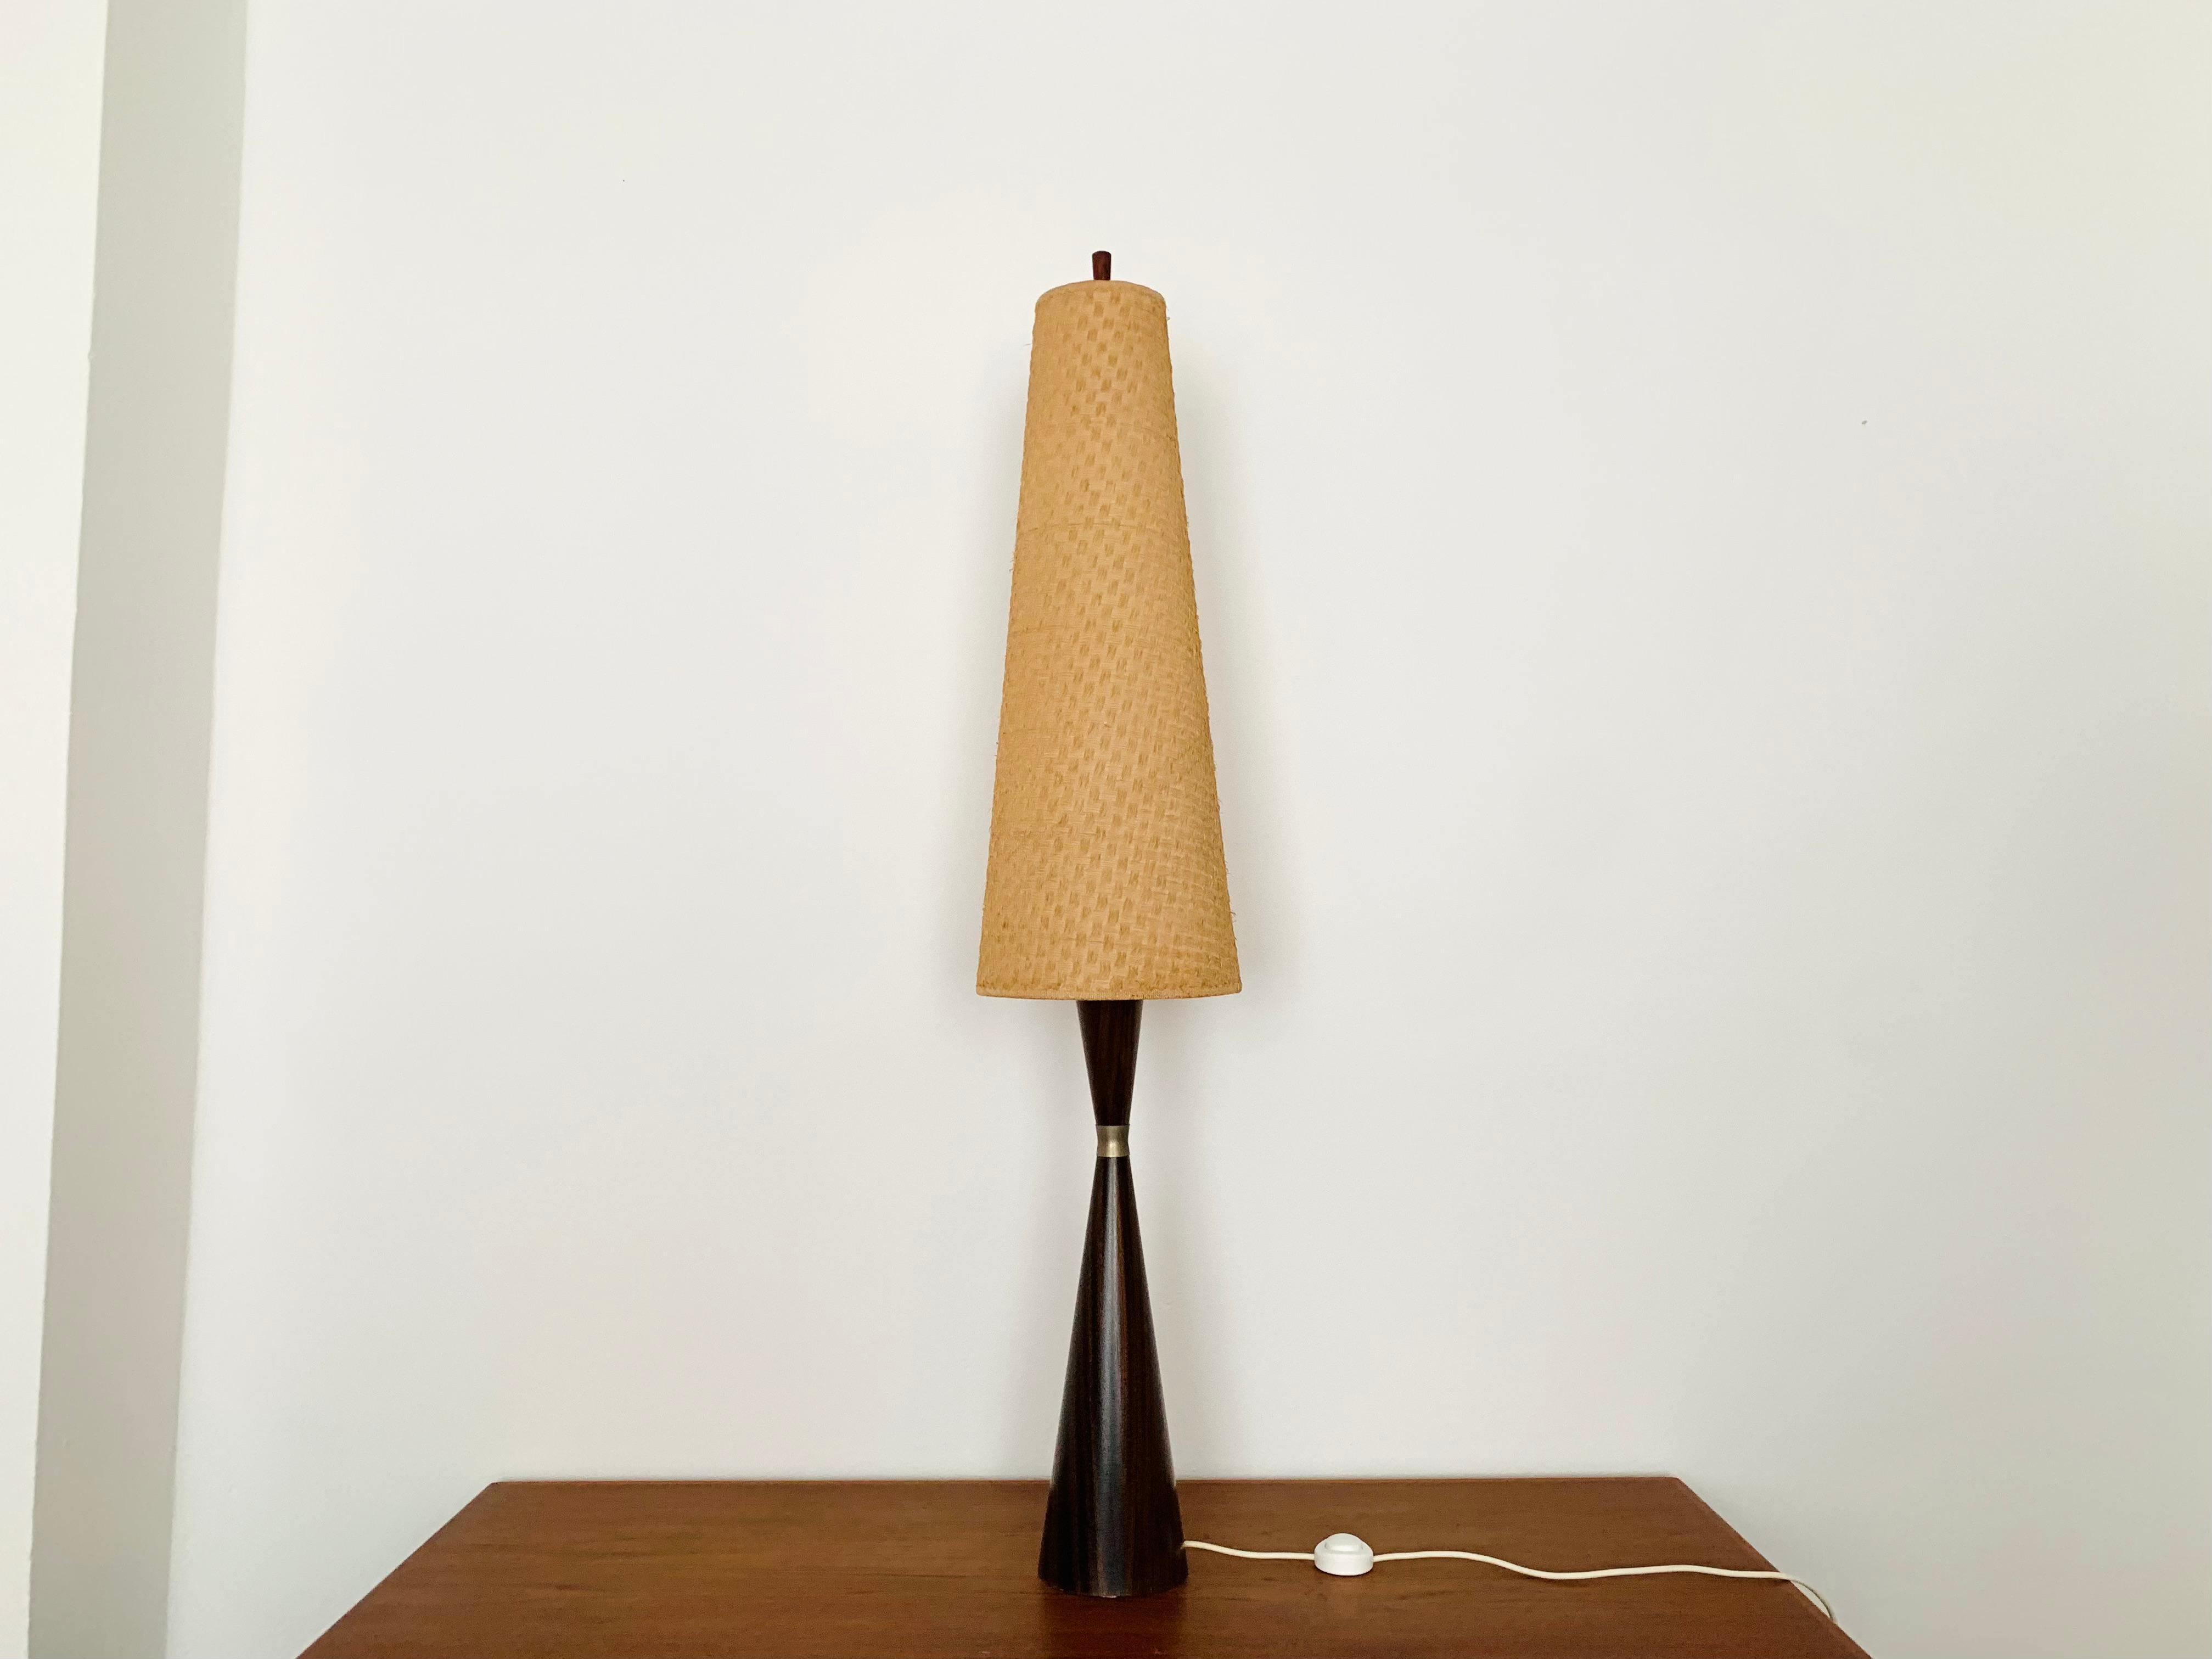 Exceptionally beautiful floor lamp from the 1960s.
The design is very elegant.
The shape and the materials create a warm and very pleasant light.

Design: Parker Knoll

Condition:

Very good vintage condition with slight signs of wear